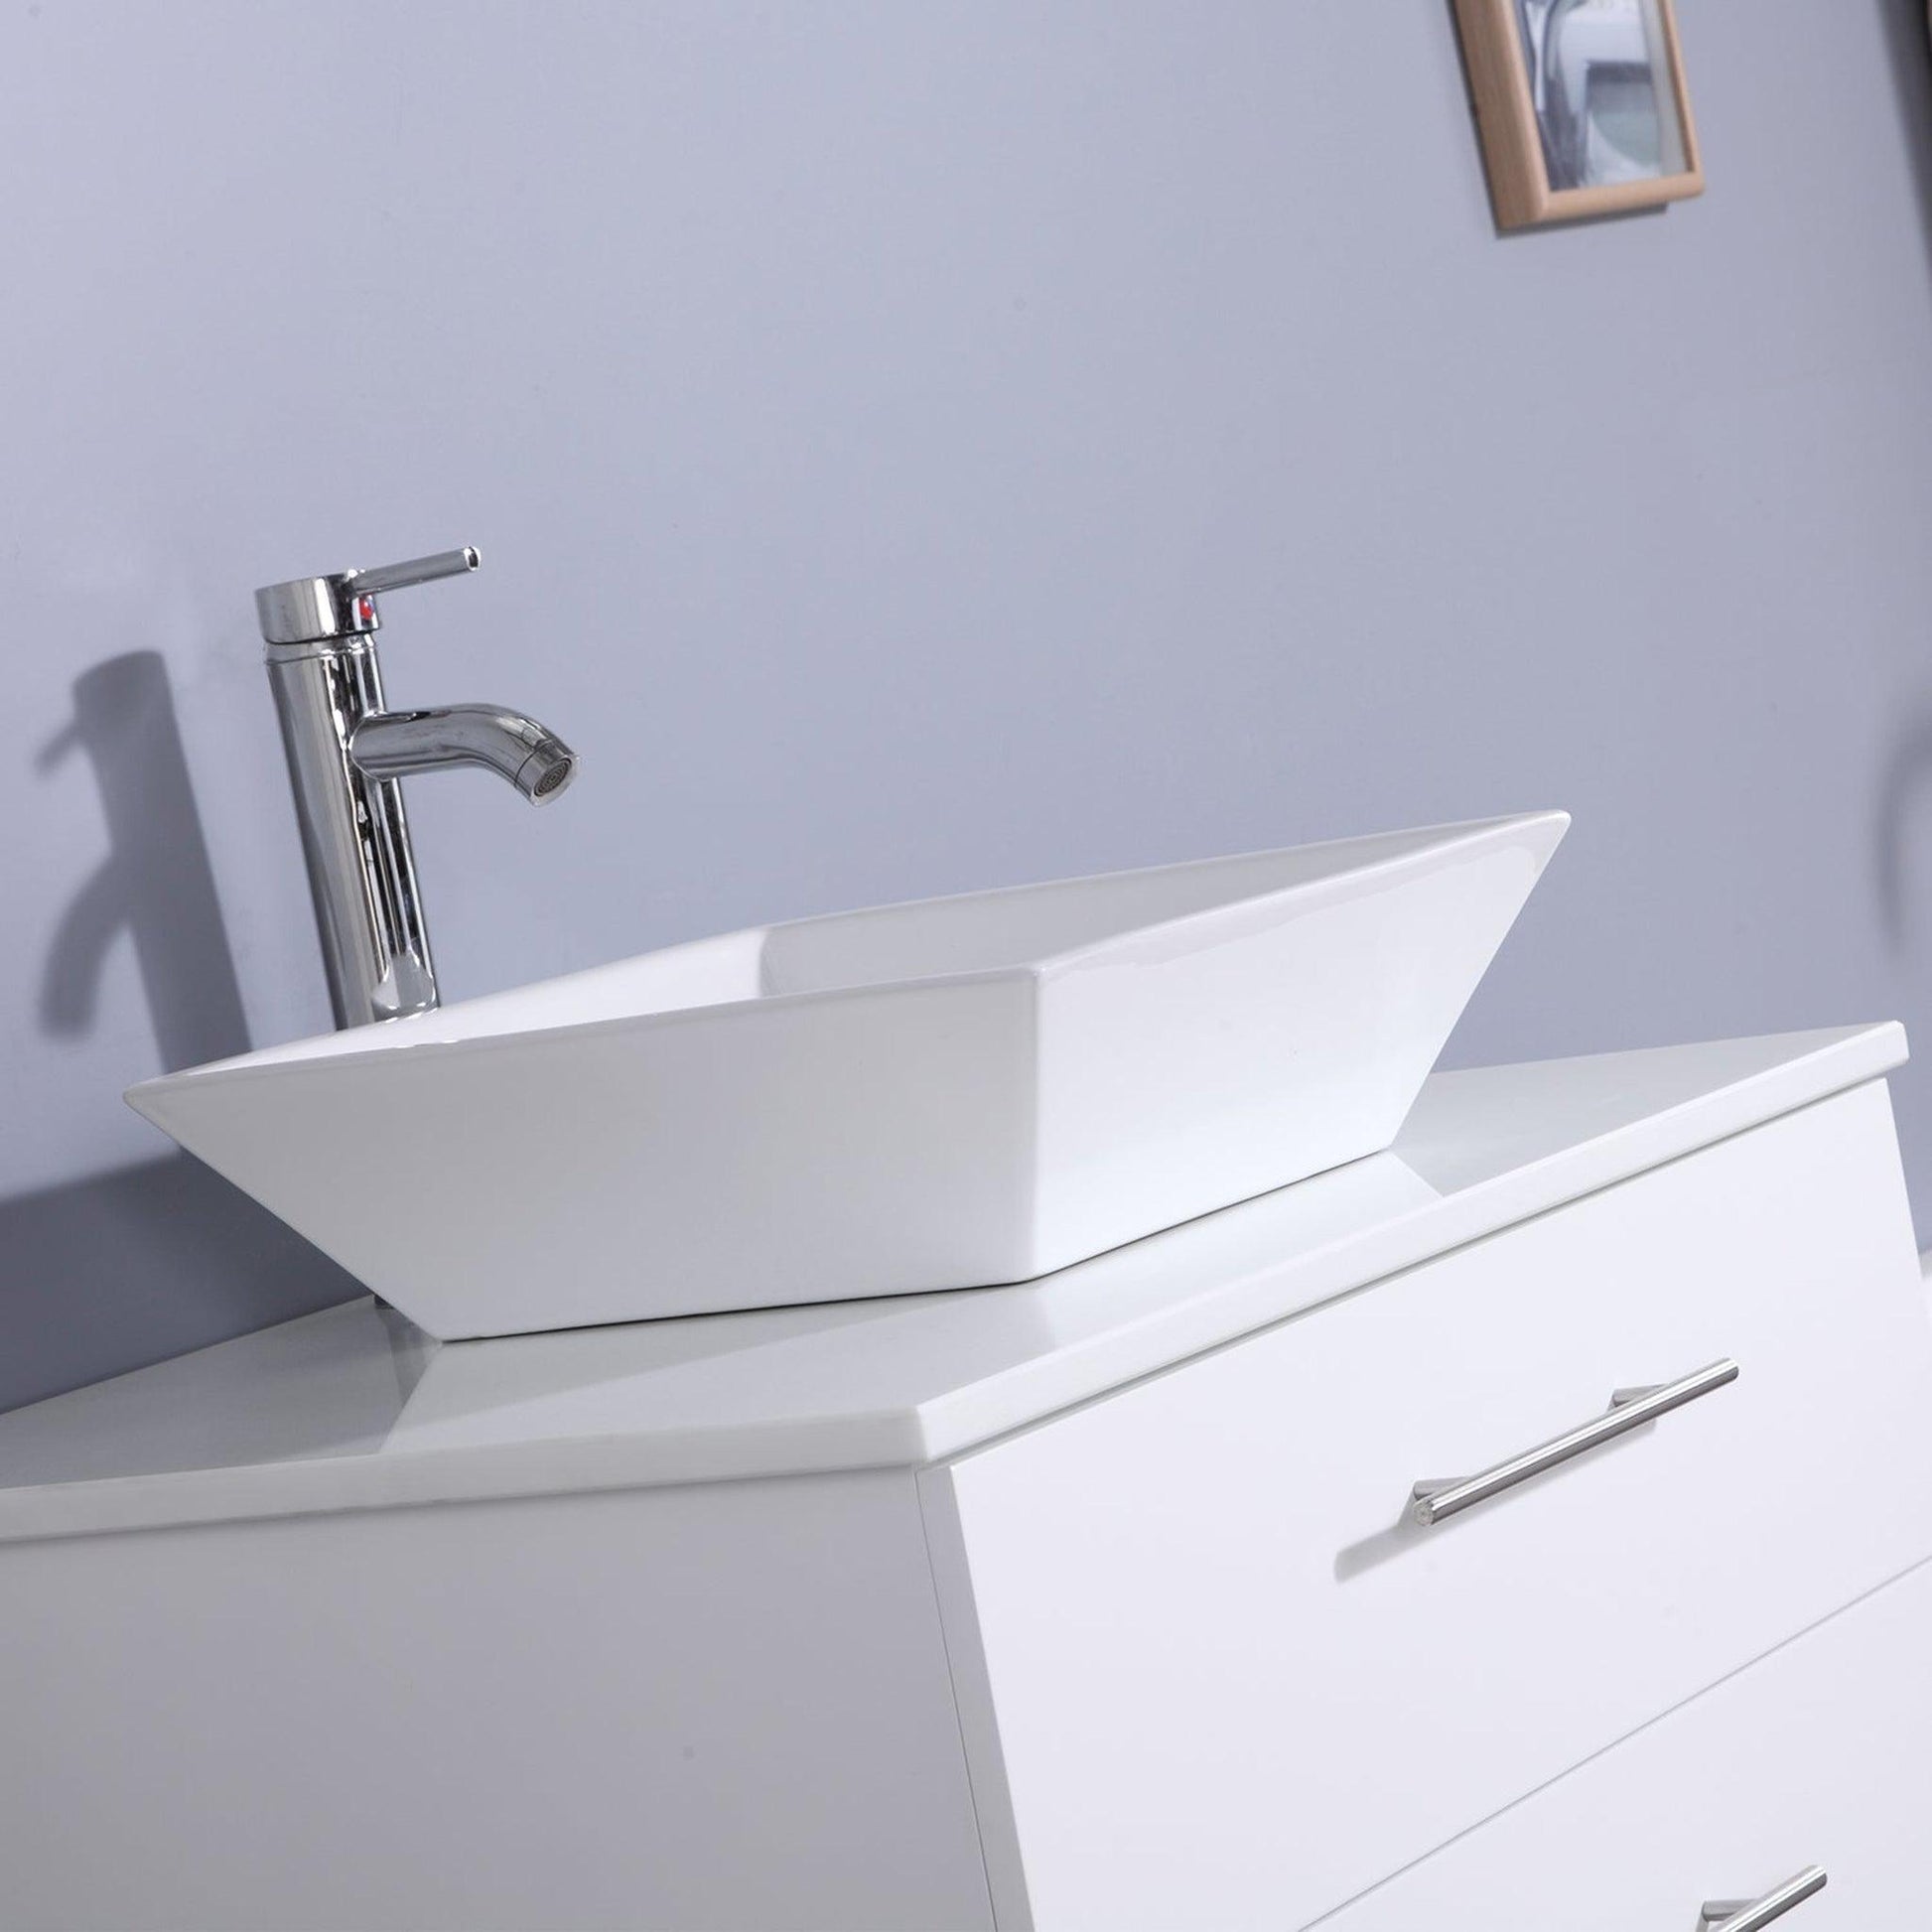 https://usbathstore.com/cdn/shop/products/Eviva-Totti-Wave-24-x-16-White-Wall-Mounted-Bathroom-Vanity-With-White-Man-Made-Stone-Countertop-and-Single-Porcelain-Sink-6.jpg?v=1678951812&width=1946